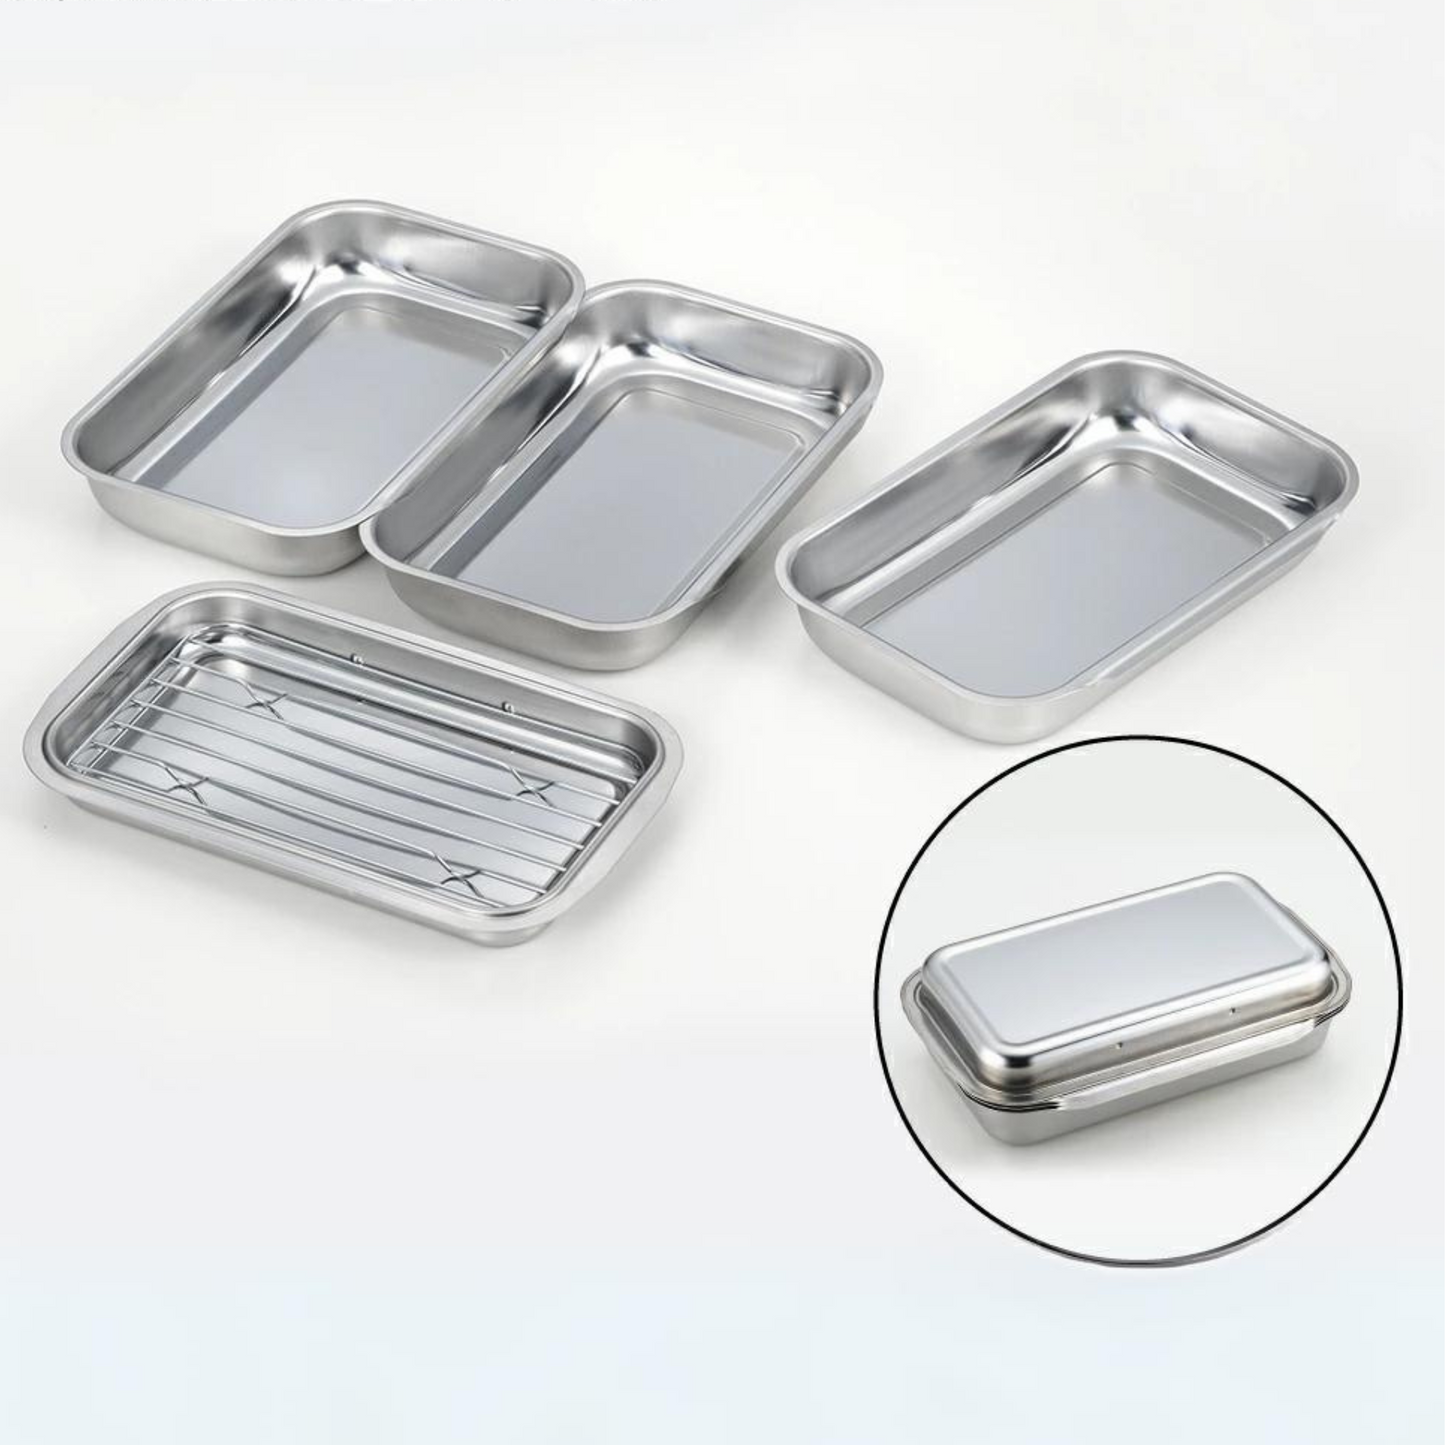 Compact Stainless Steel Vat Set